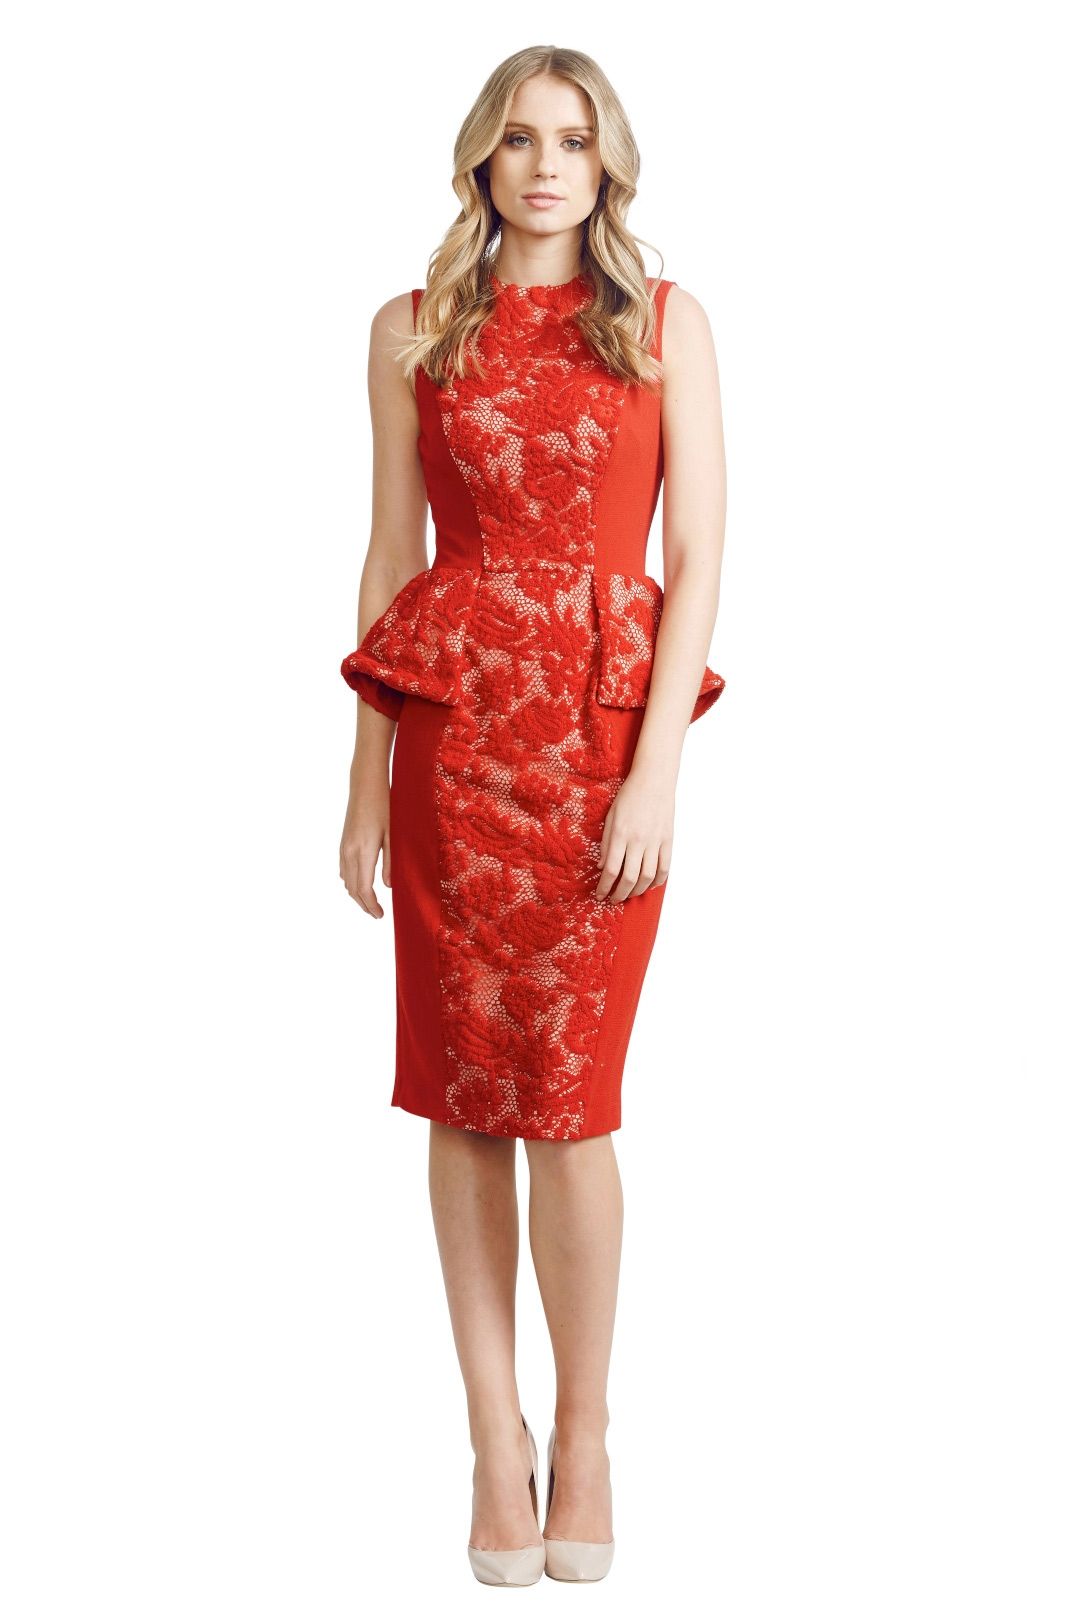 Alex Perry - Natalia Dress - Red - Front